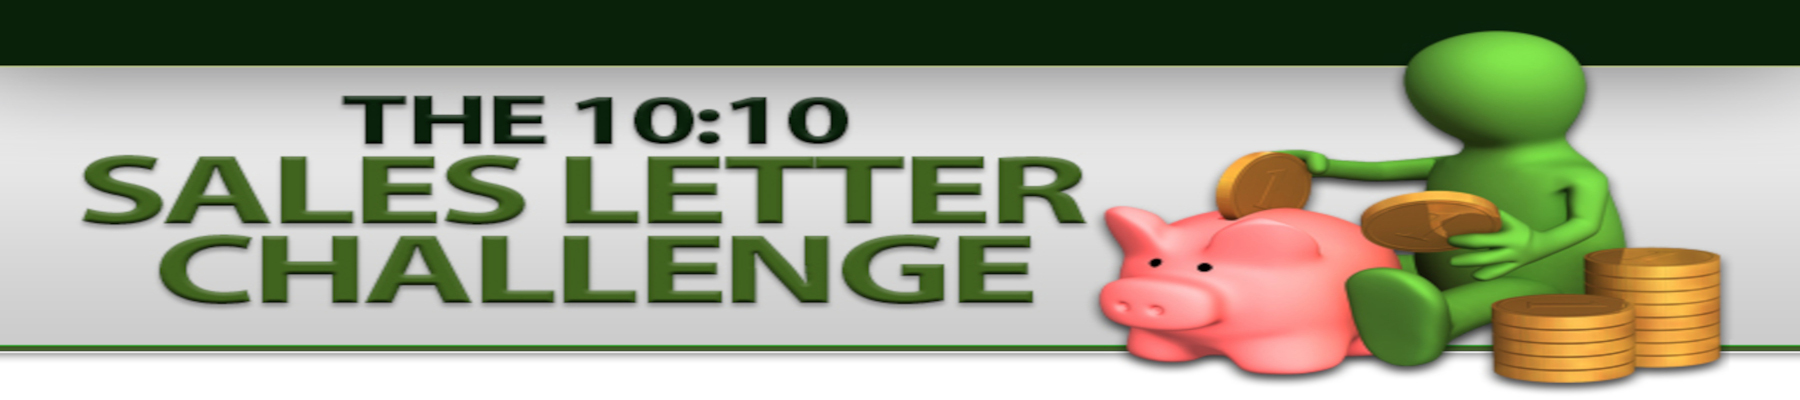 The 10:10 Sales Letter Challenge